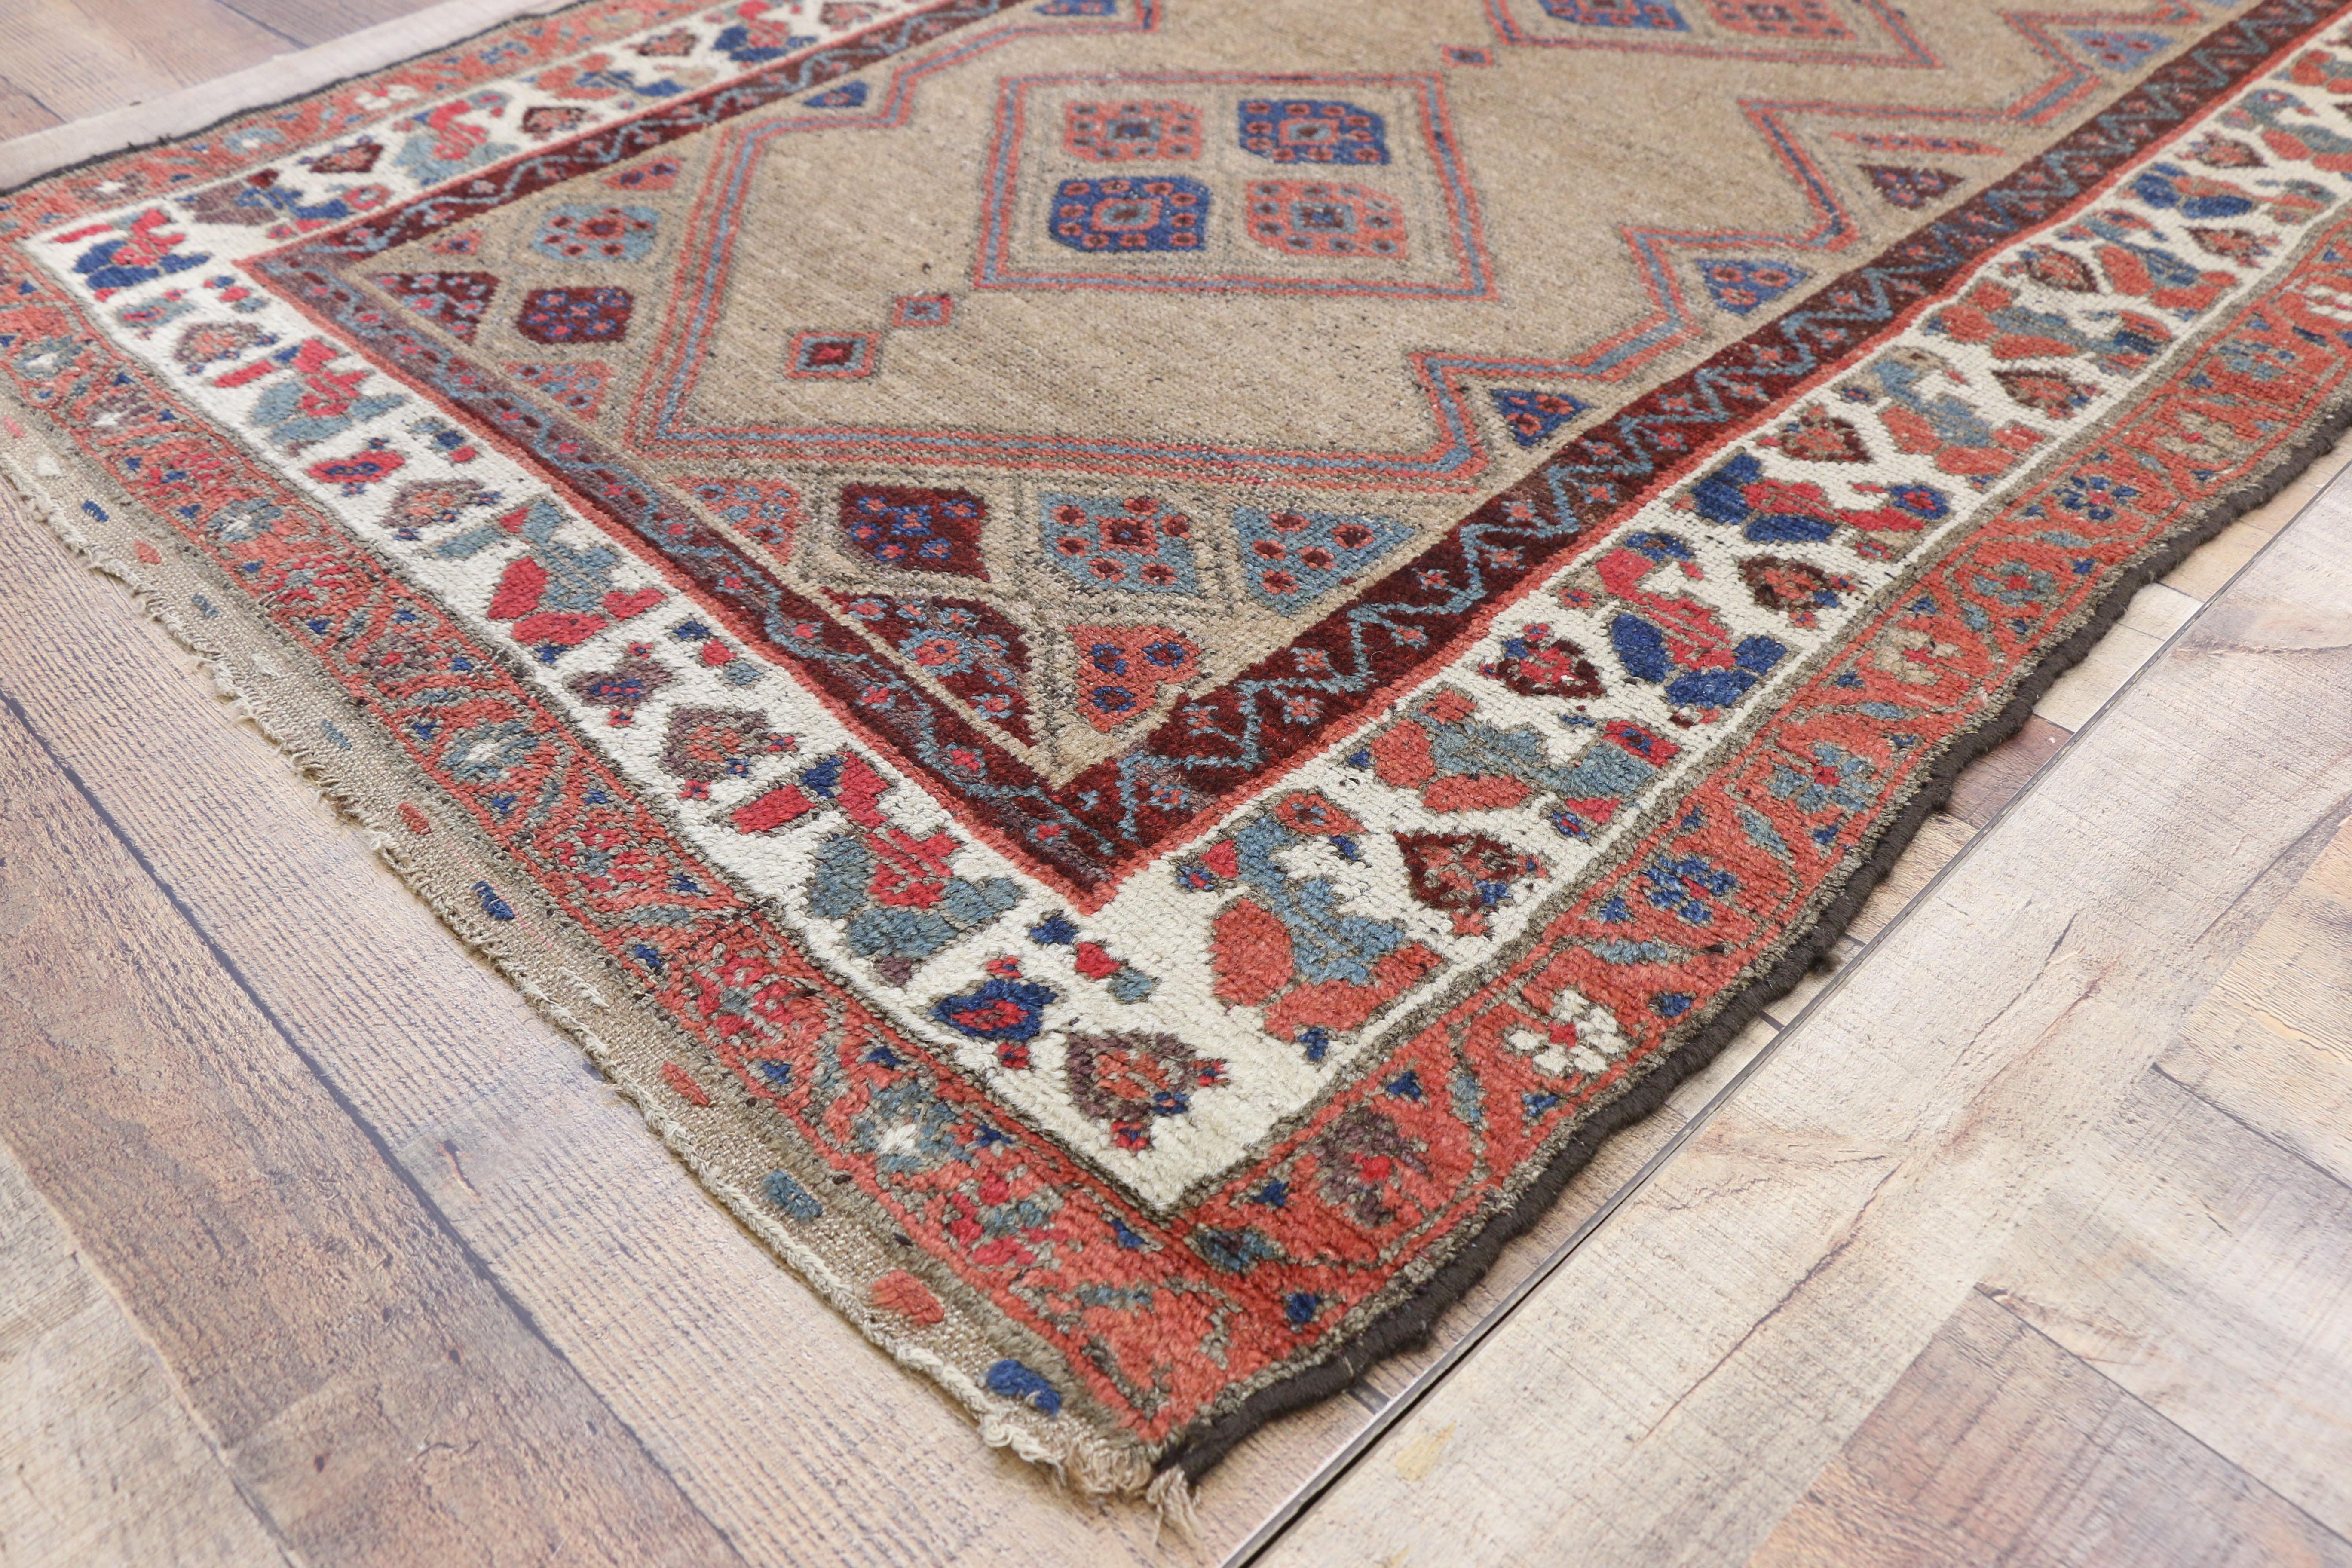 Antique Persian Malayer Accent Rug, Entry or Foyer Rug In Good Condition For Sale In Dallas, TX